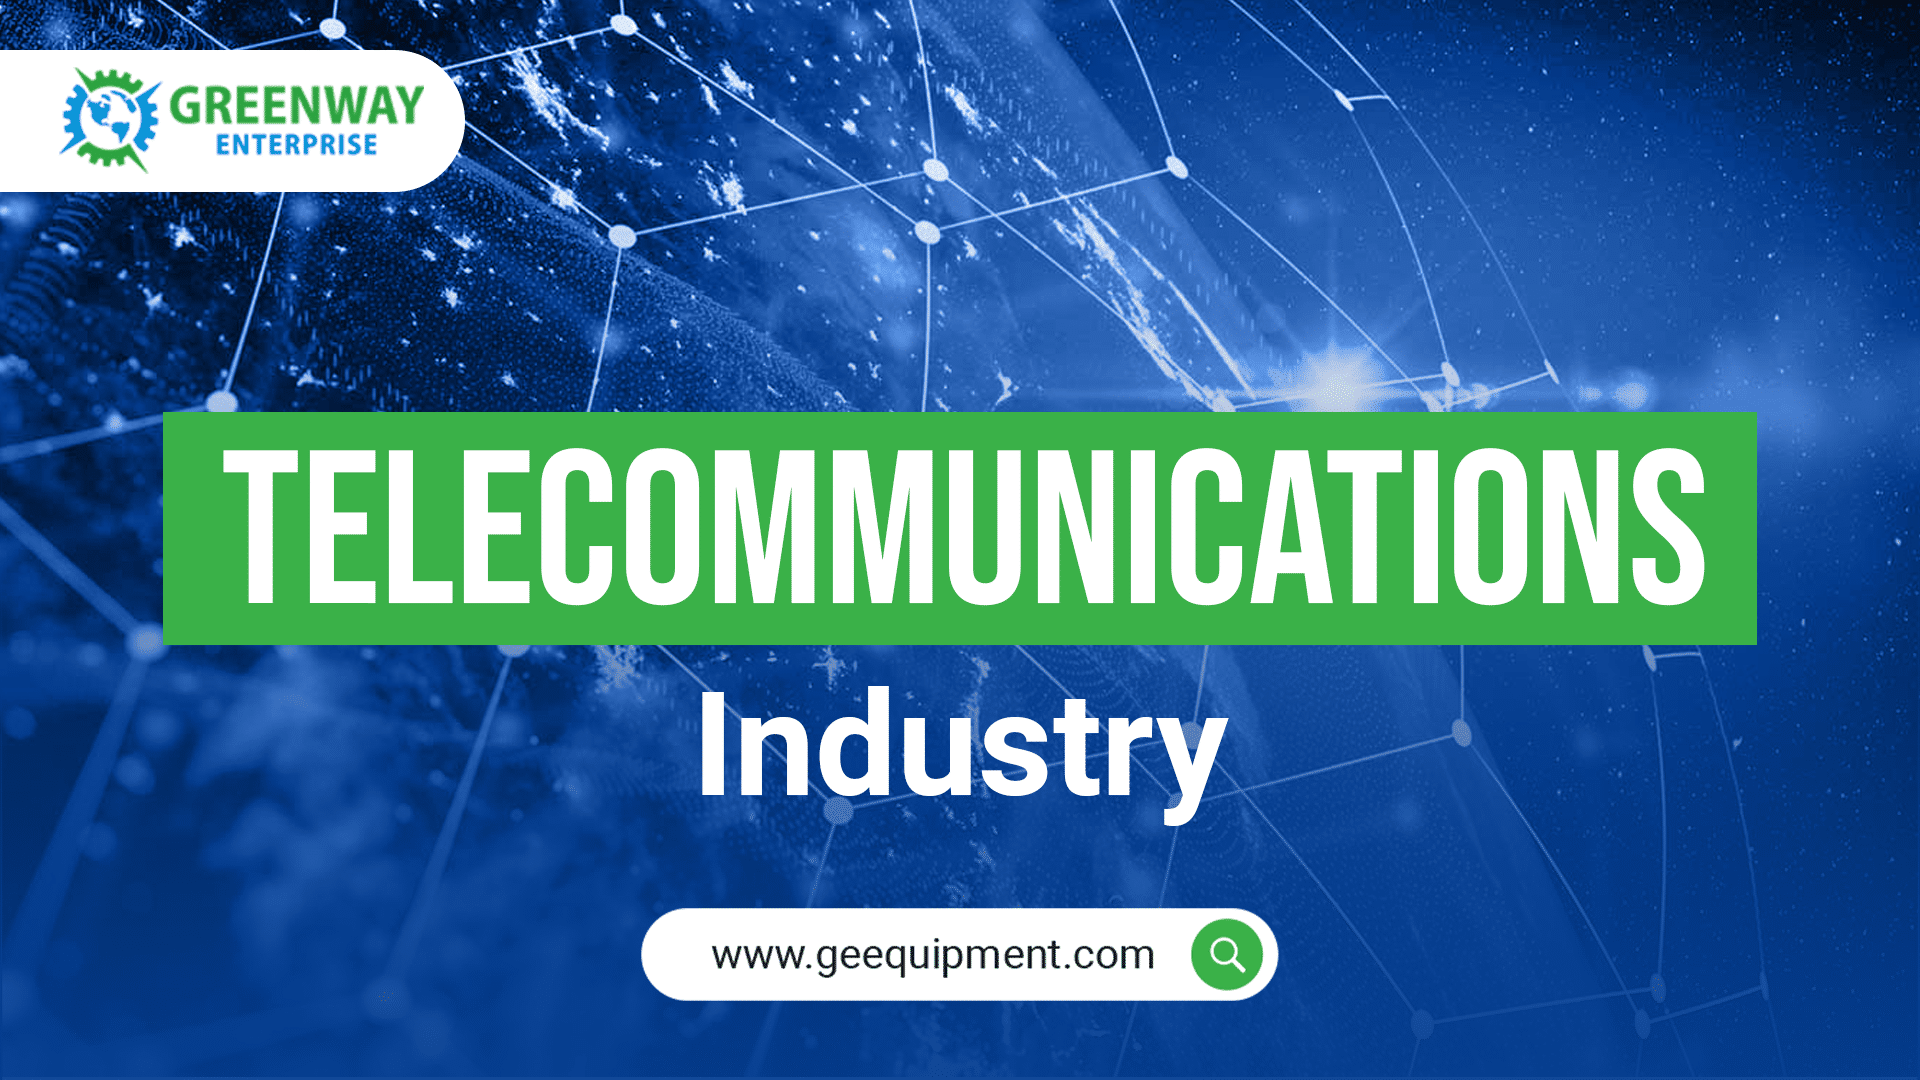 Complete Life Cycle Analysis in the Telecommunication Industry